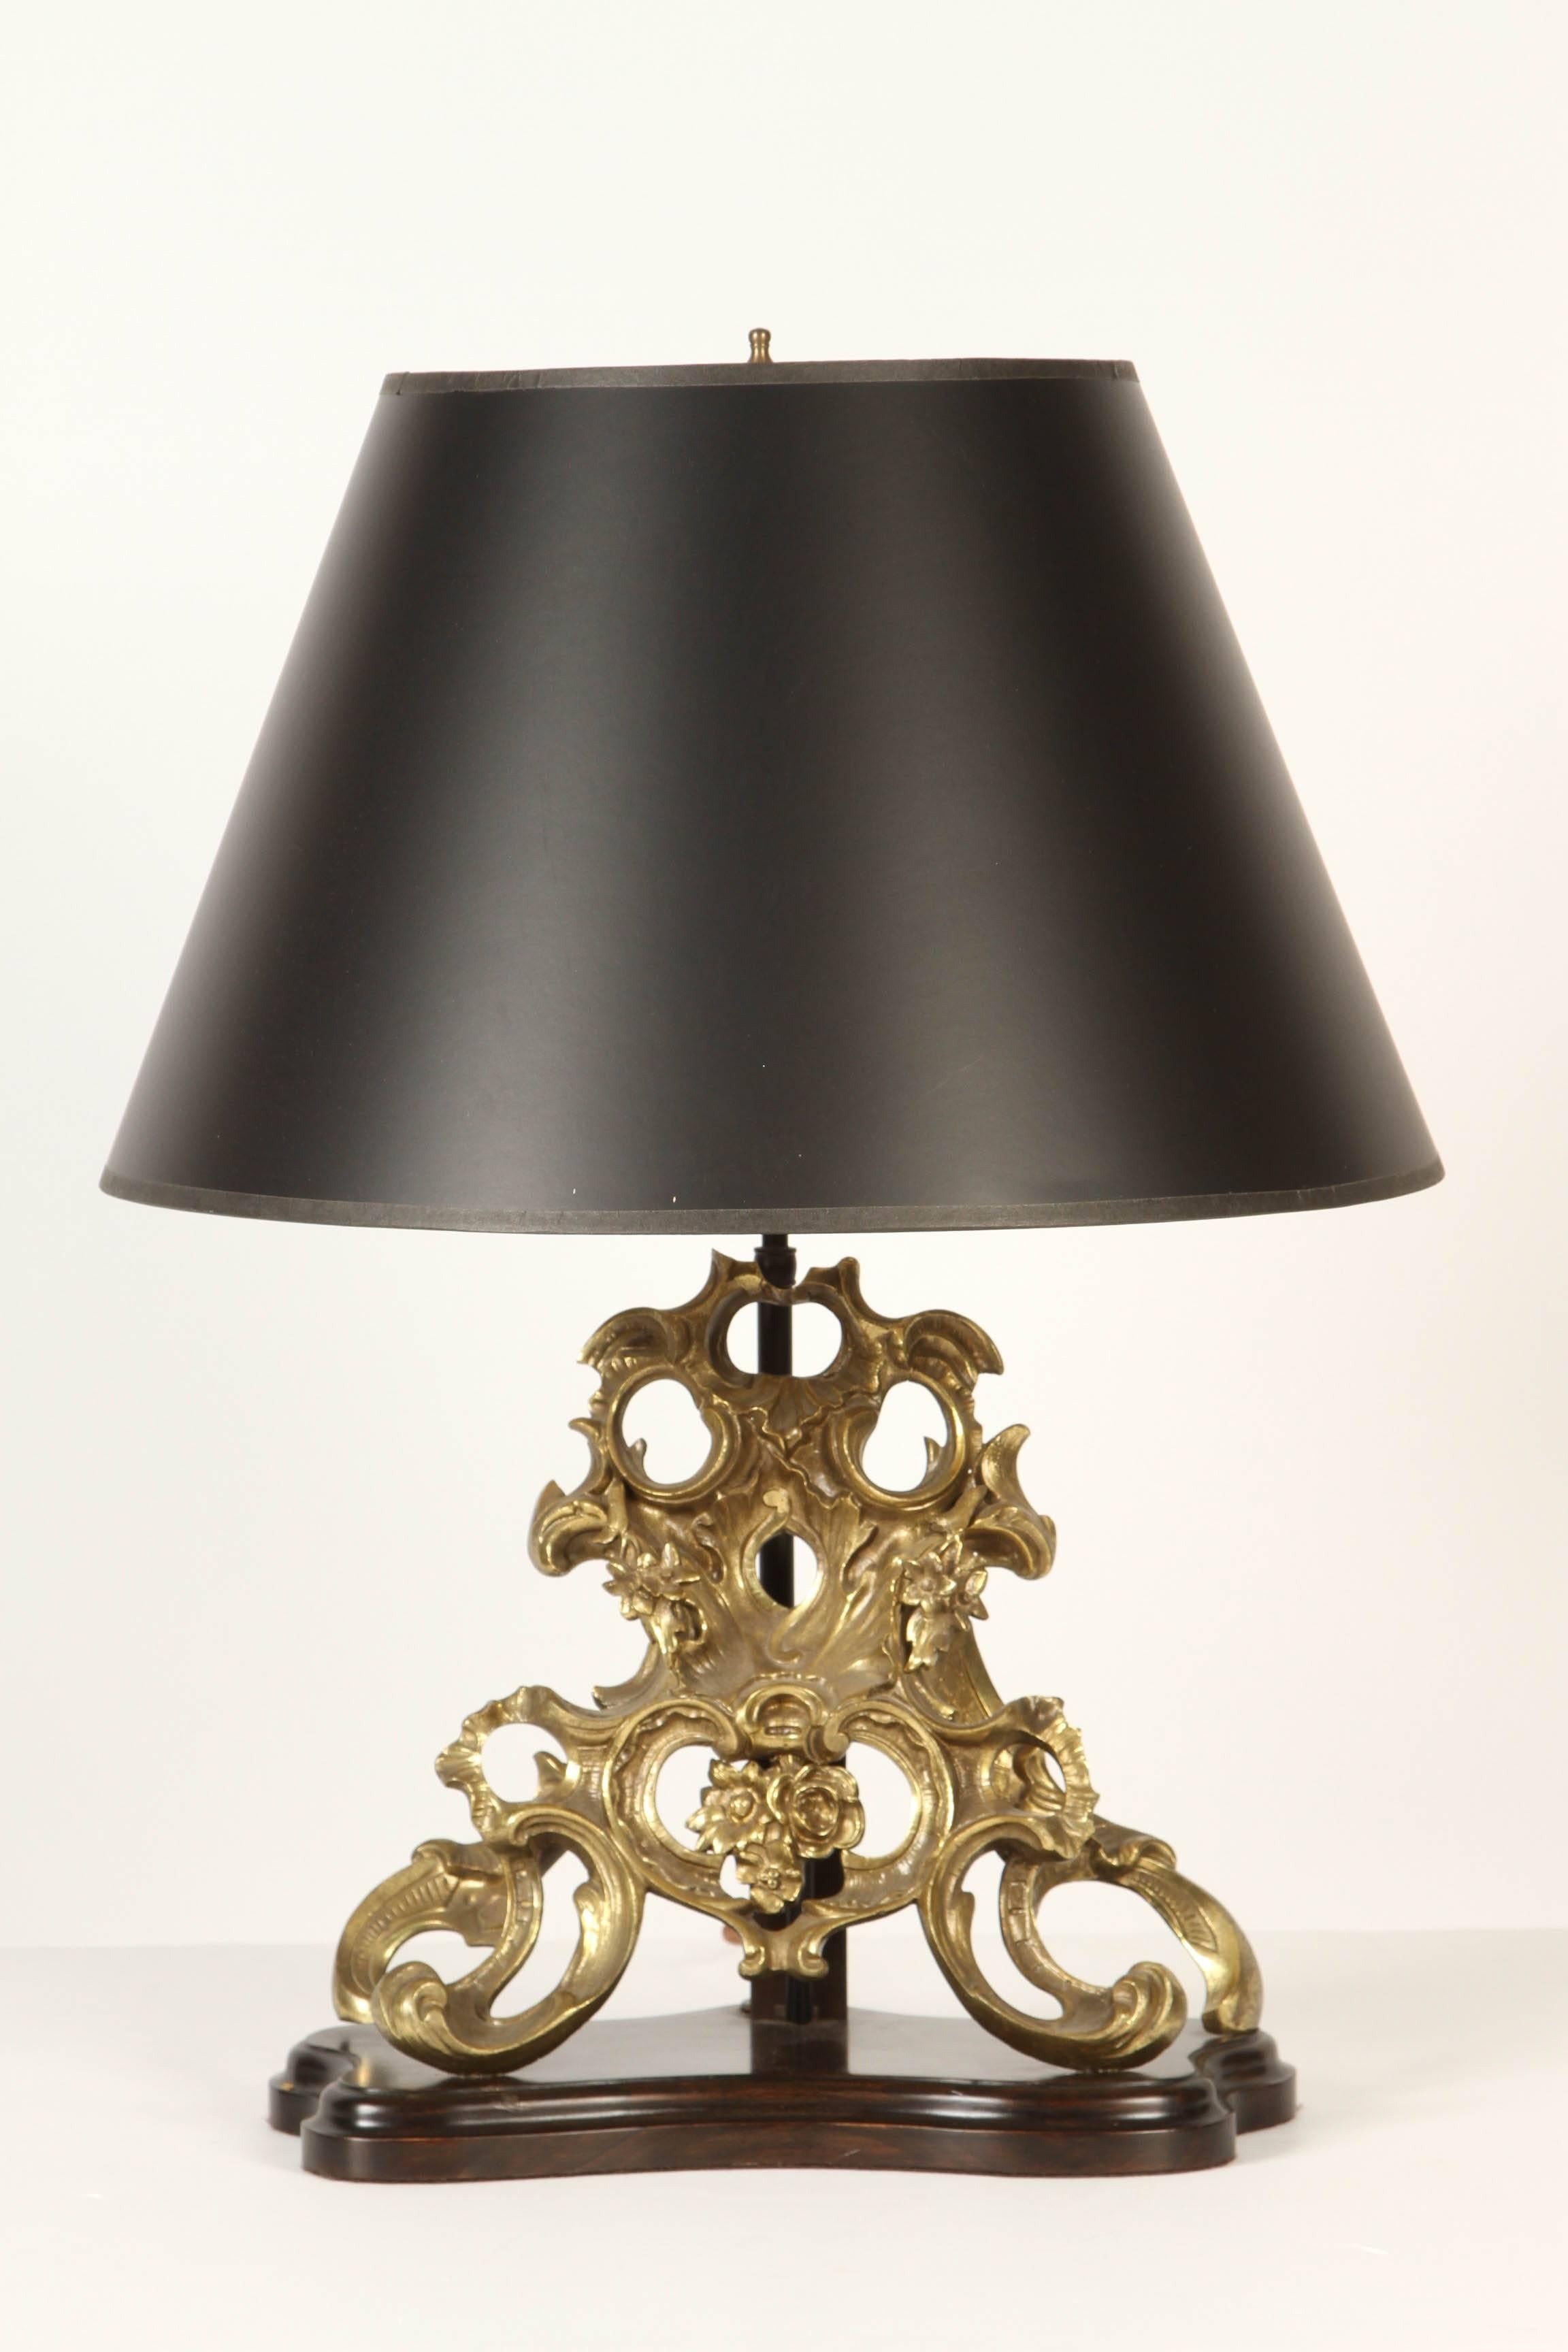 A pair of 19th century French Chenets of solid brass, which are intricately detailed with Rocailles and floral elements. Now fitted as lamps (110w) on custom wood bases.  Sold without shades.